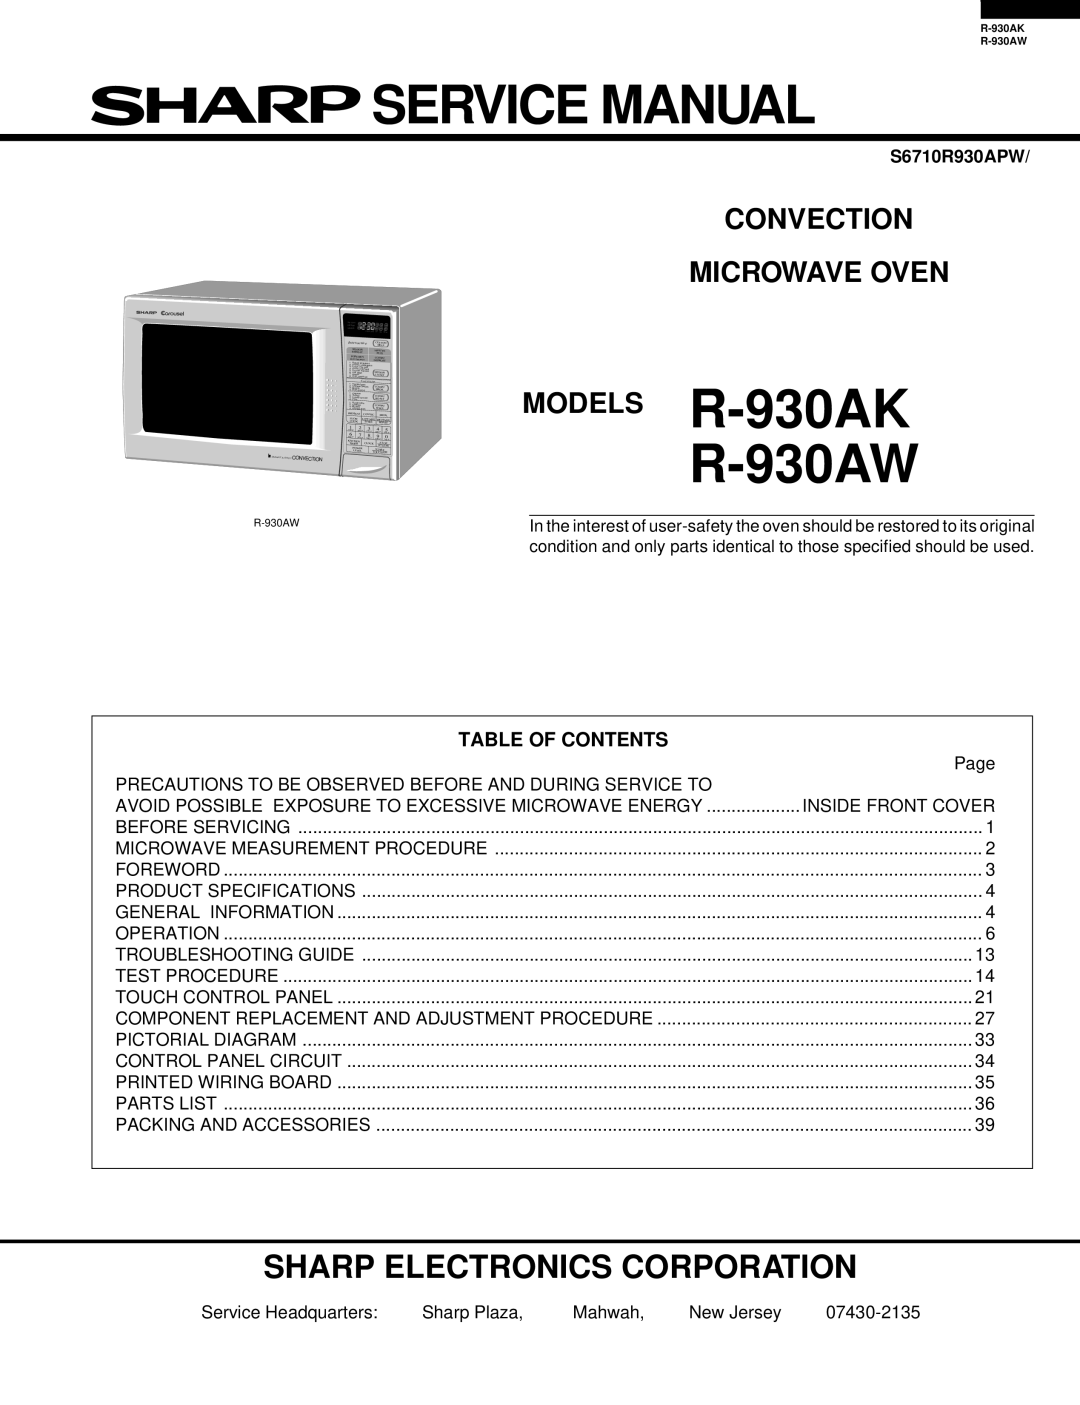 Sharp service manual Sharp Electronics Corporation, Table Of Contents, Service Manual, MODELS R-930AK R-930AW 